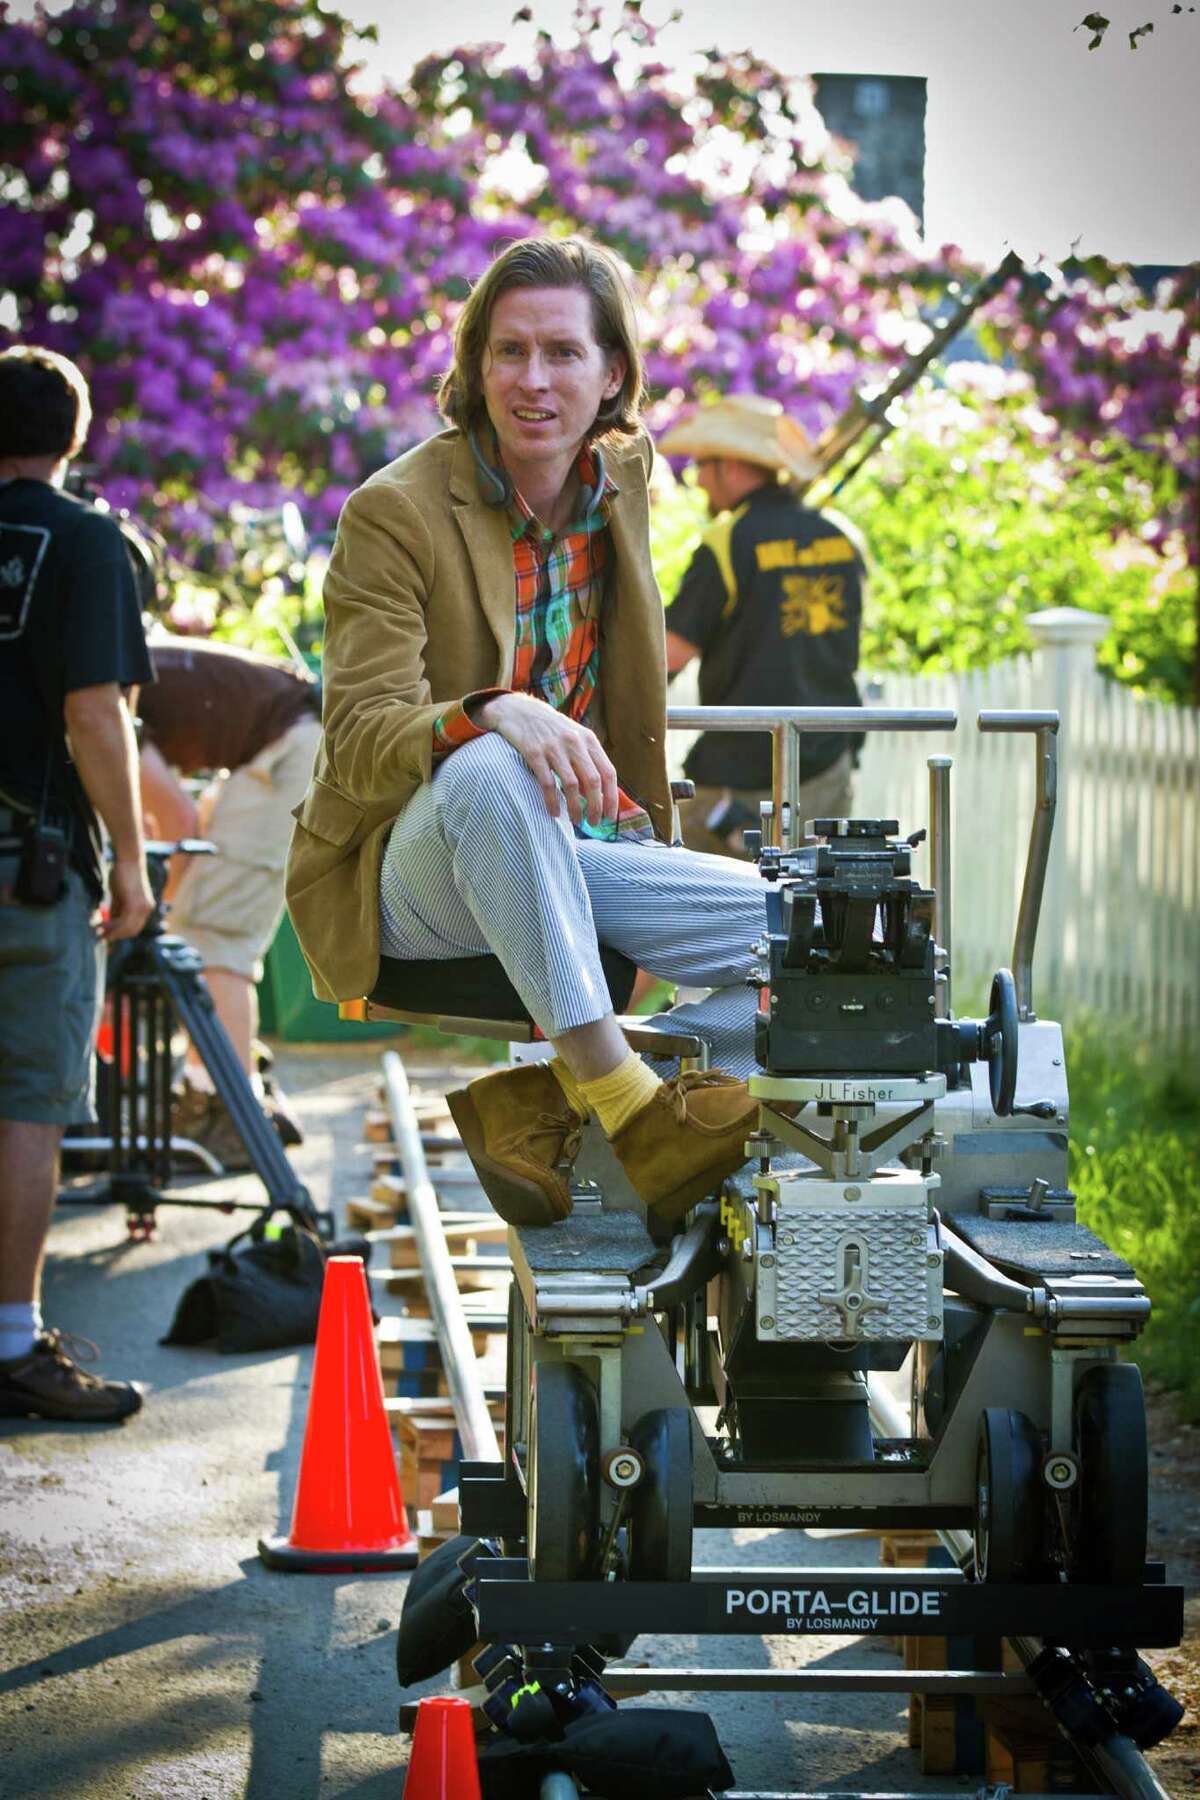 Houston-born director Wes Anderson's ninth film, "Isle of Dogs," was released in spring 2018. But you may not know much about this local yet larger-than-life director whose quirky style garners a cult-like following. Keep clicking to find out some interesting factoids about one of Houston's most famous artists.